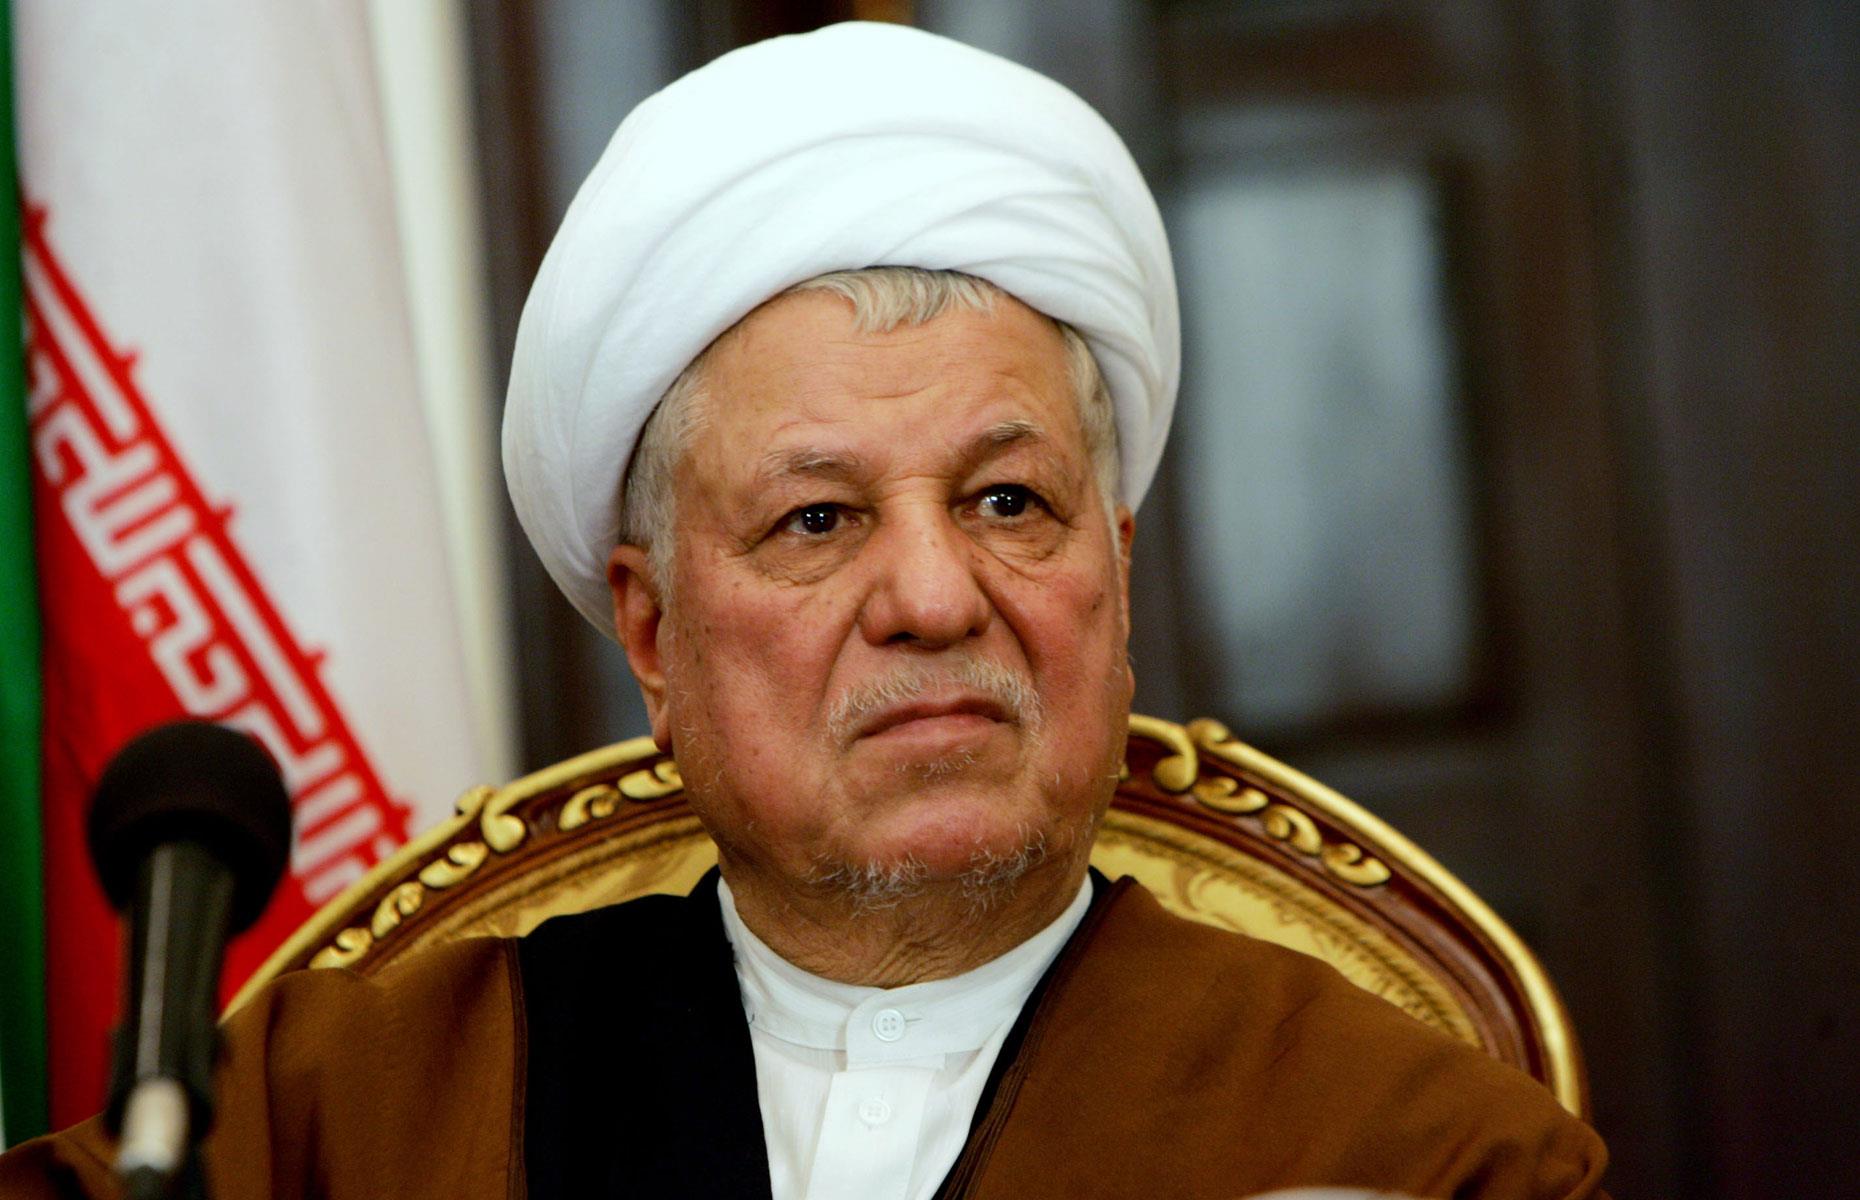 <p>Akbar Hashemi Rafsanjani served as the fourth president of Iran. Born into a wealthy family, he was in office from 1989 to 1997 and had a number of business concerns, which made him a very rich man indeed. In 2006, the politician, who died in 2017, had a net worth pegged by <em>Forbes</em> at $1.1 billion. That's the equivalent of $1.4 billion in today's money.</p>